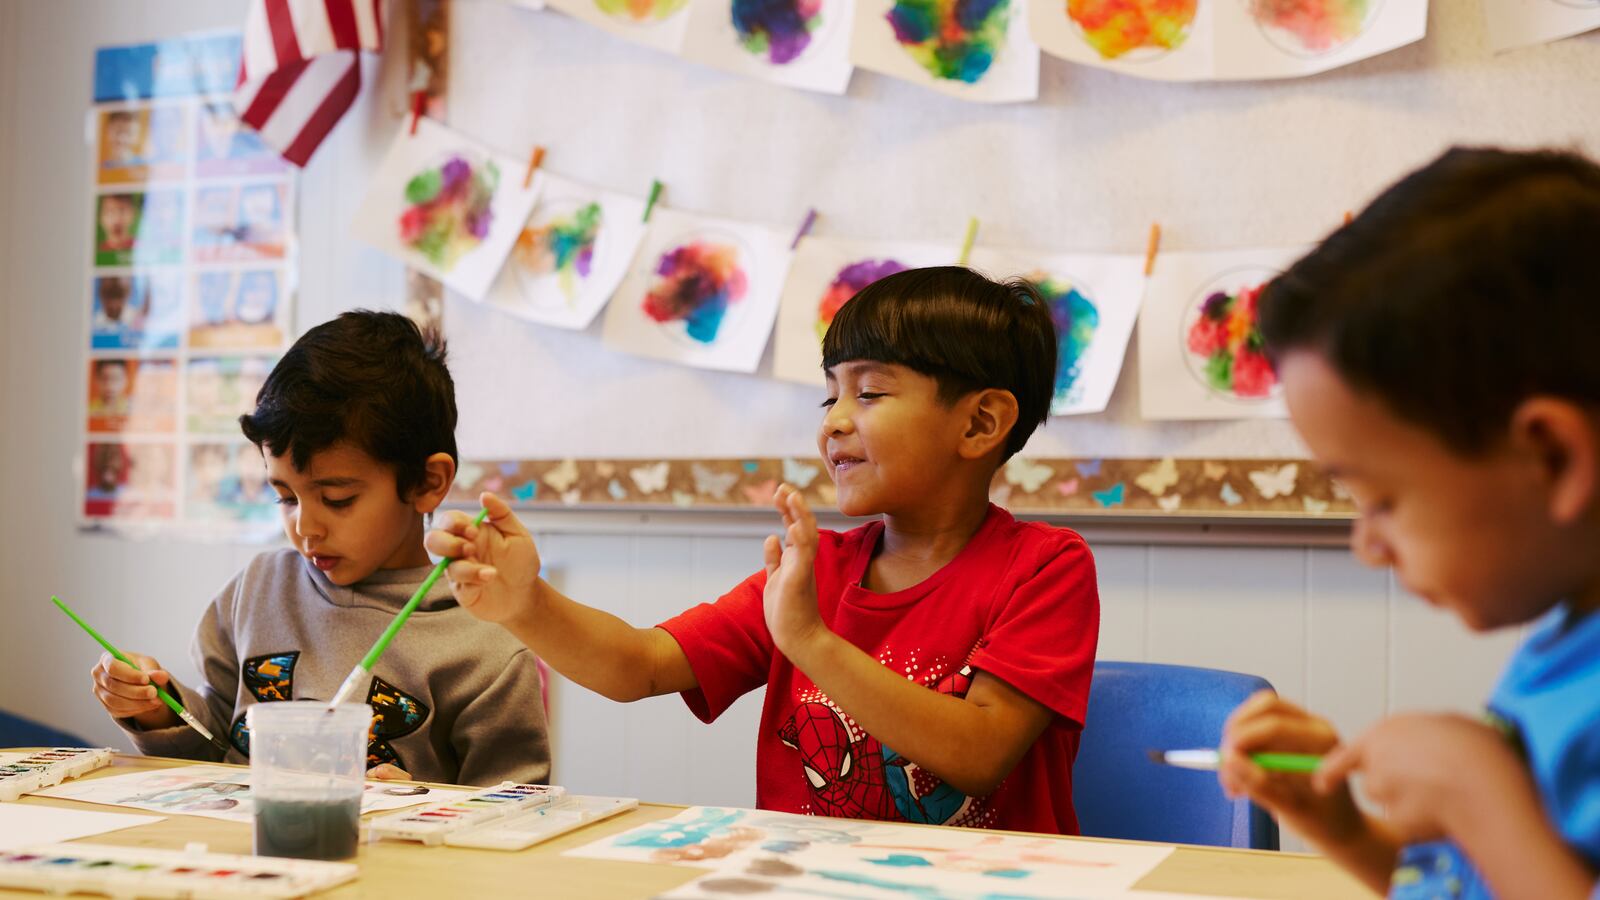 Three young students paint during preschool class on a wooden table with art hanging to dry in the background.